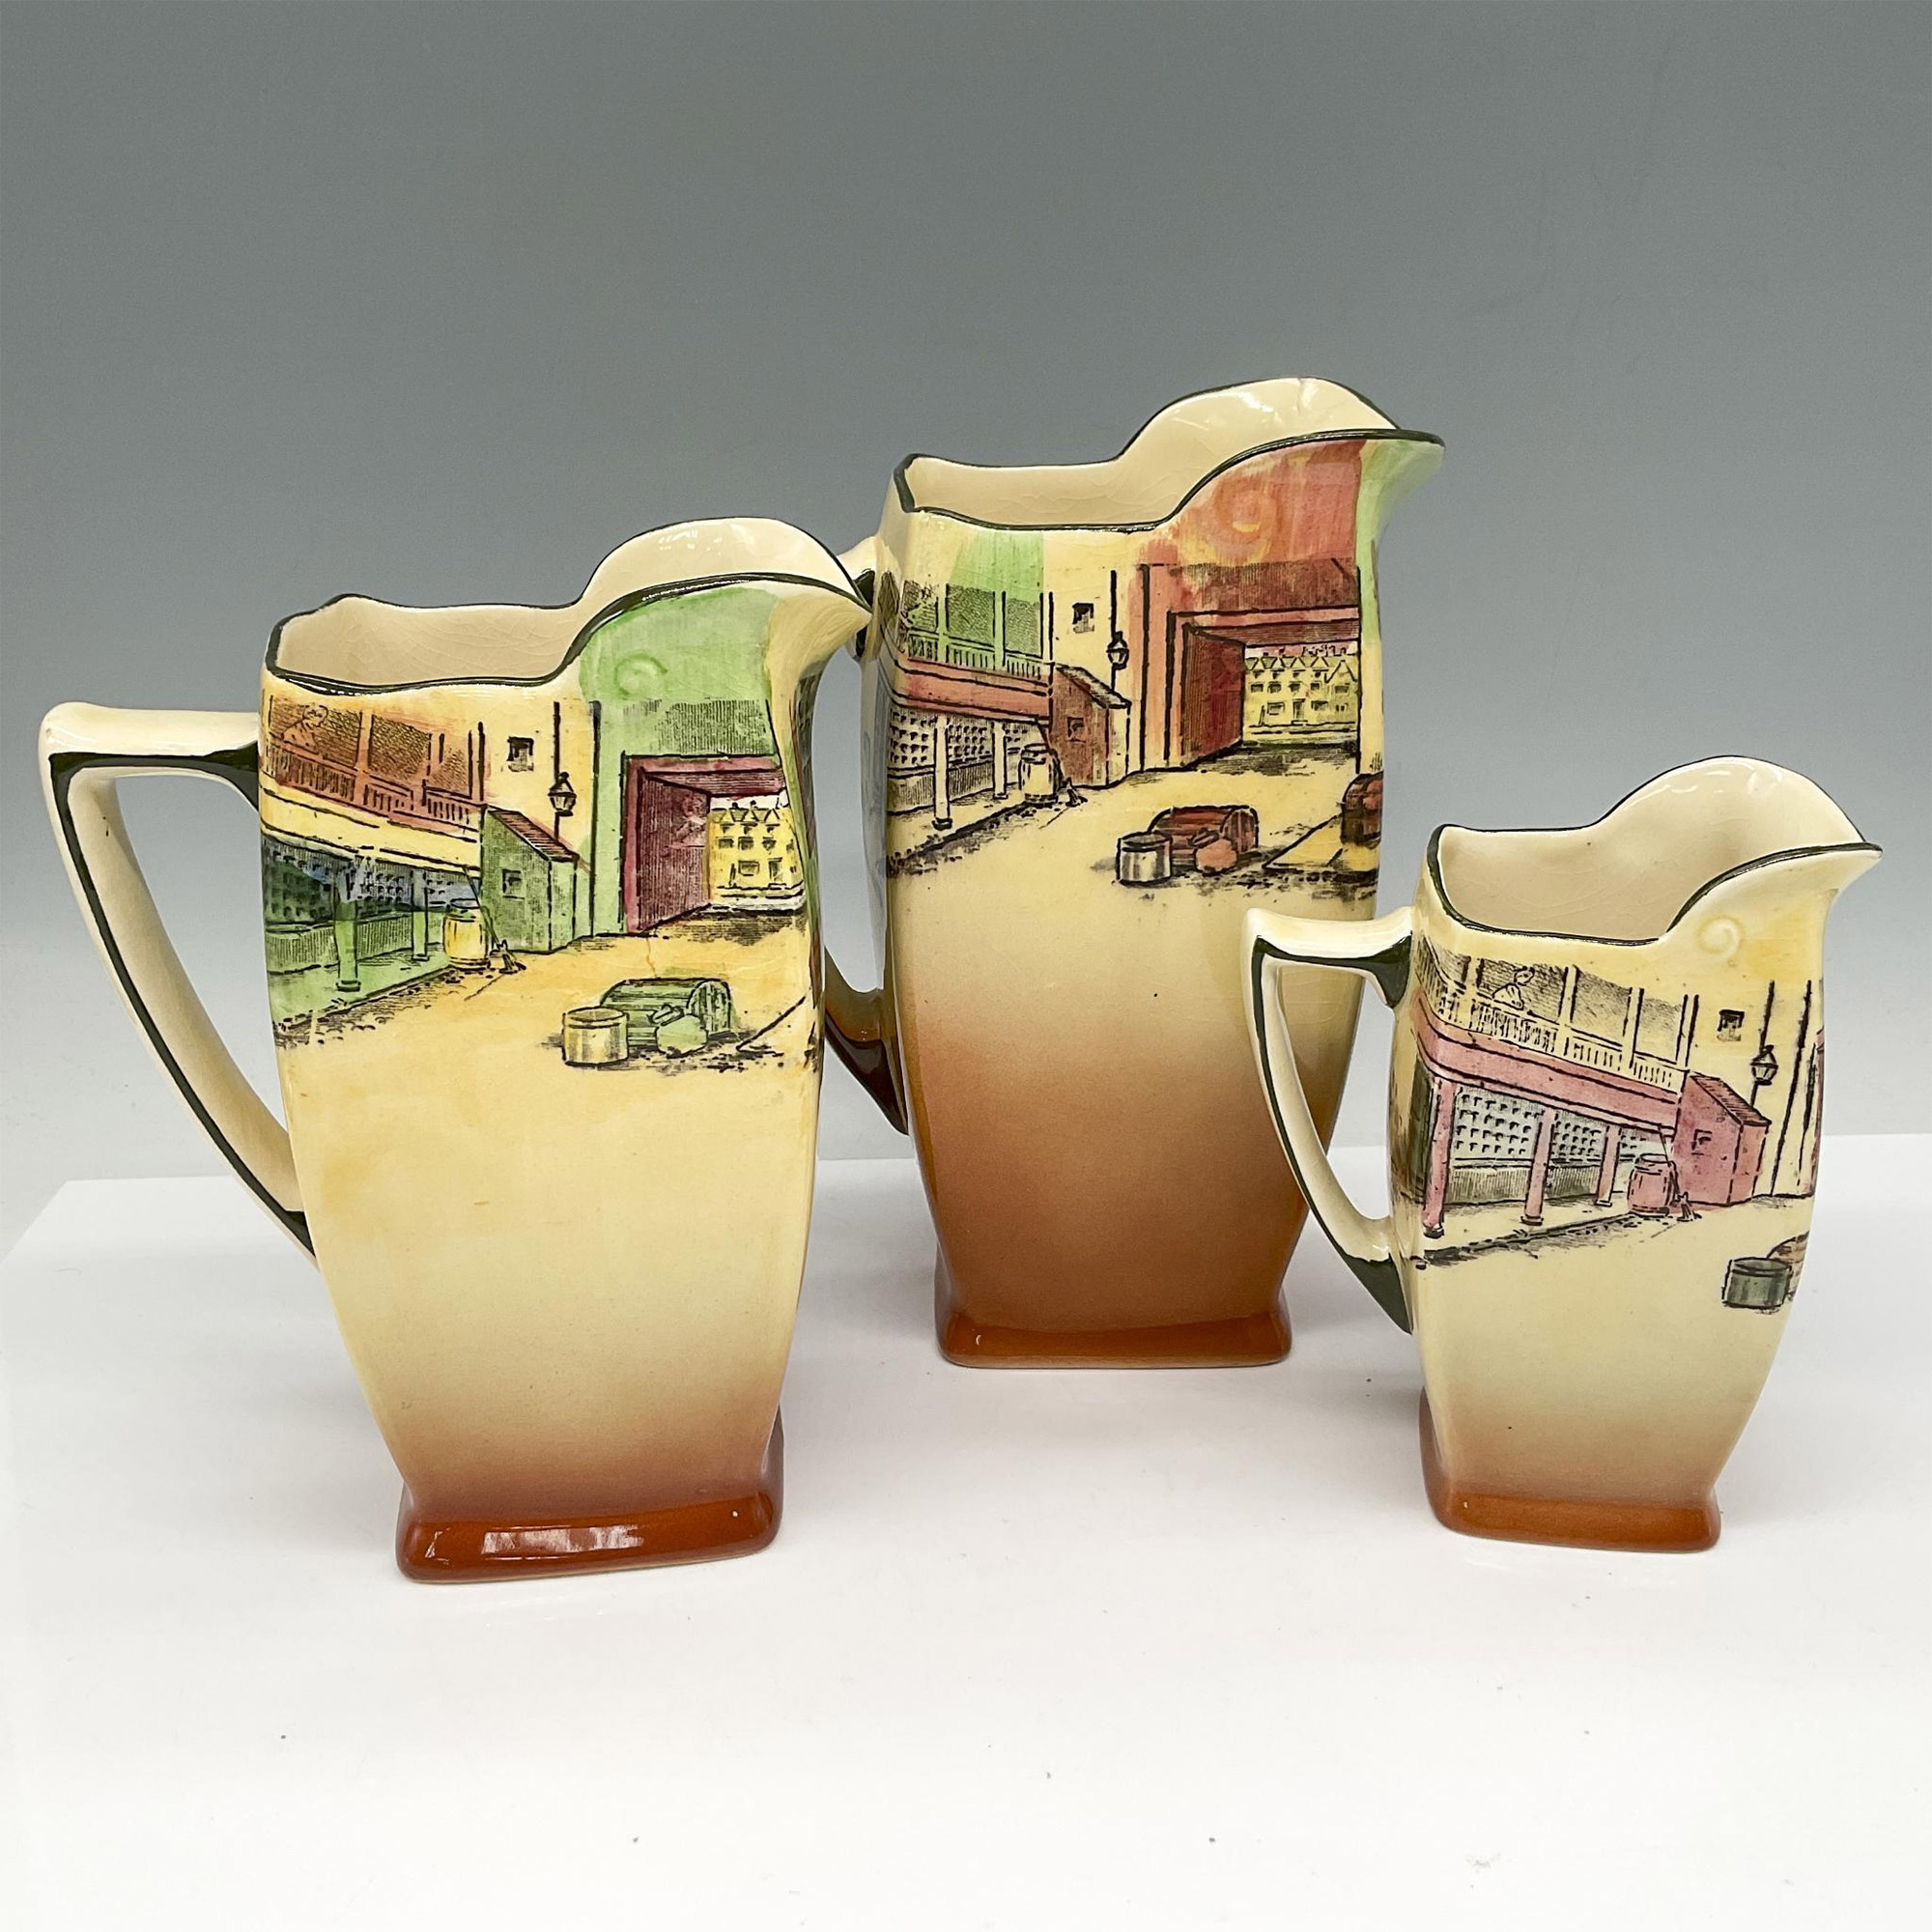 3pc Royal Doulton Dickens Ware Pitchers - Image 2 of 4